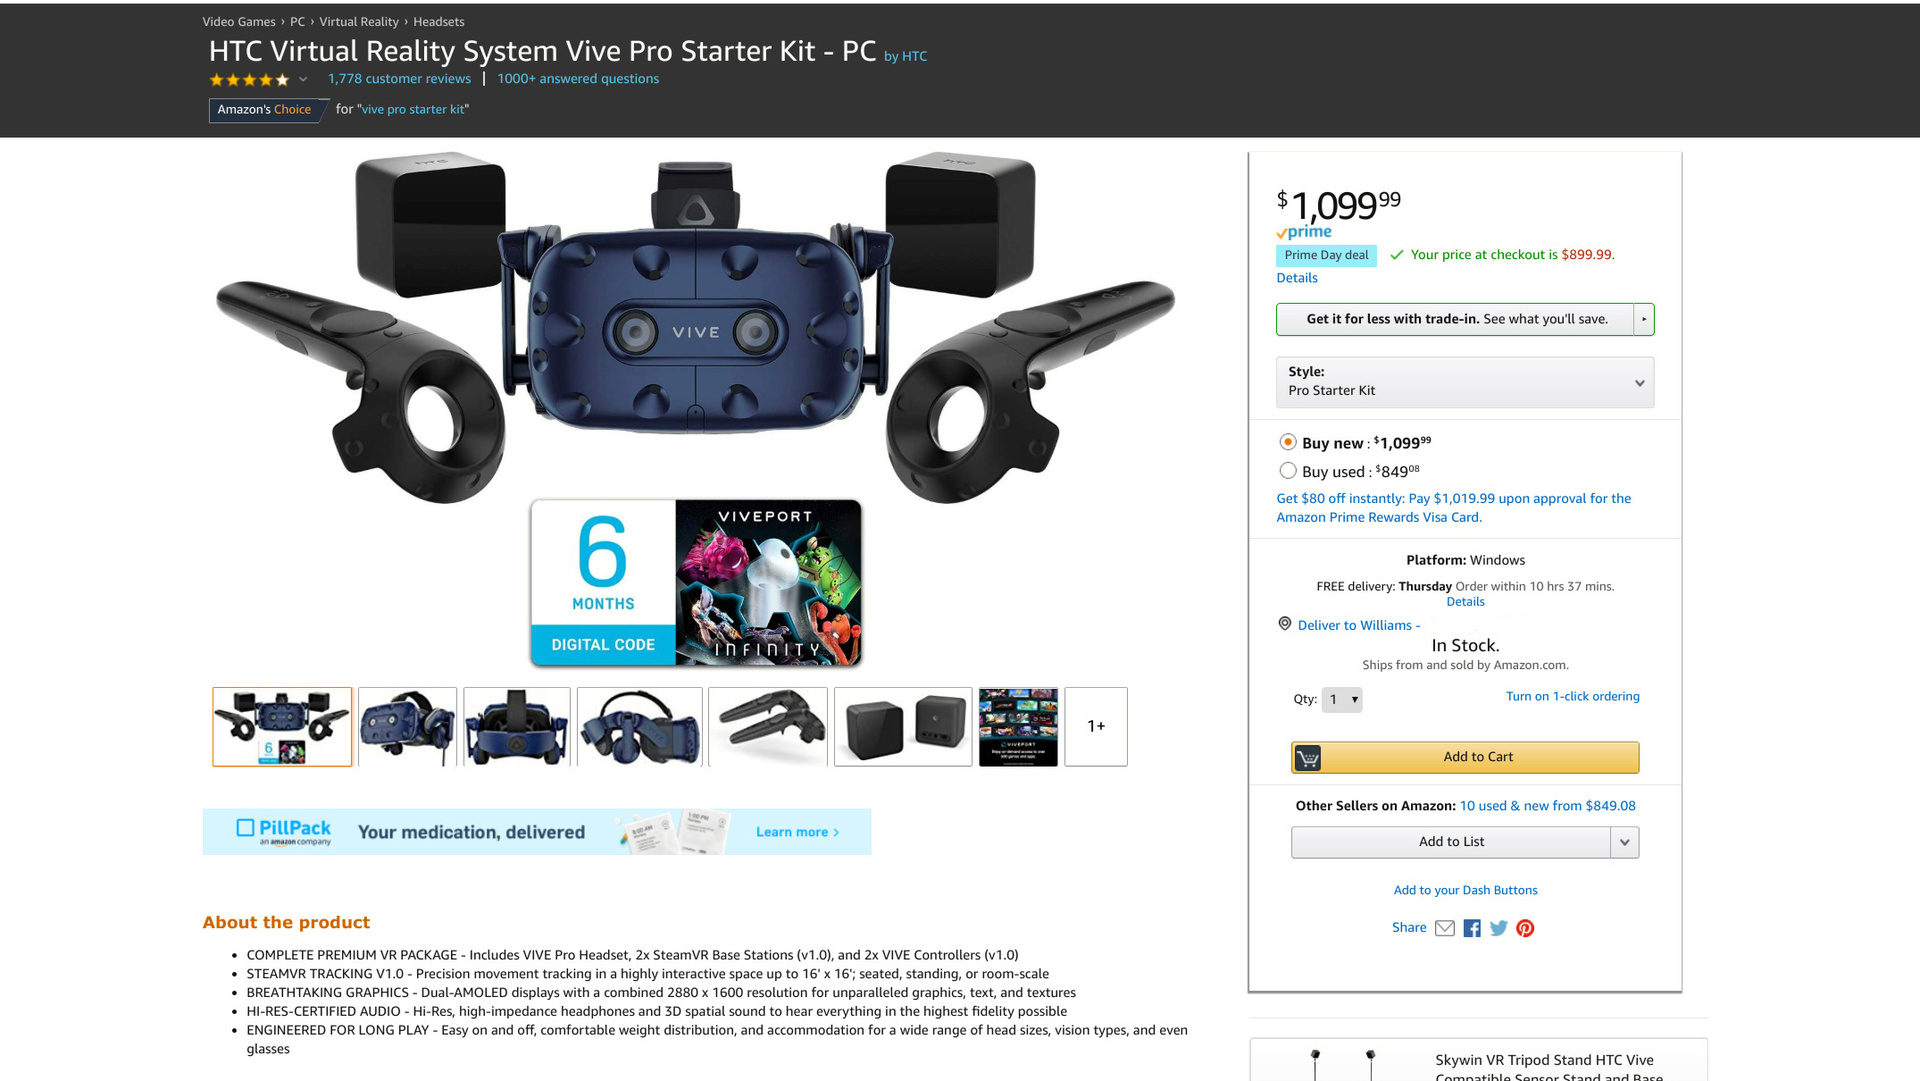 Amazon Prime Day deal on the HTC Vive Pro Starter Kit